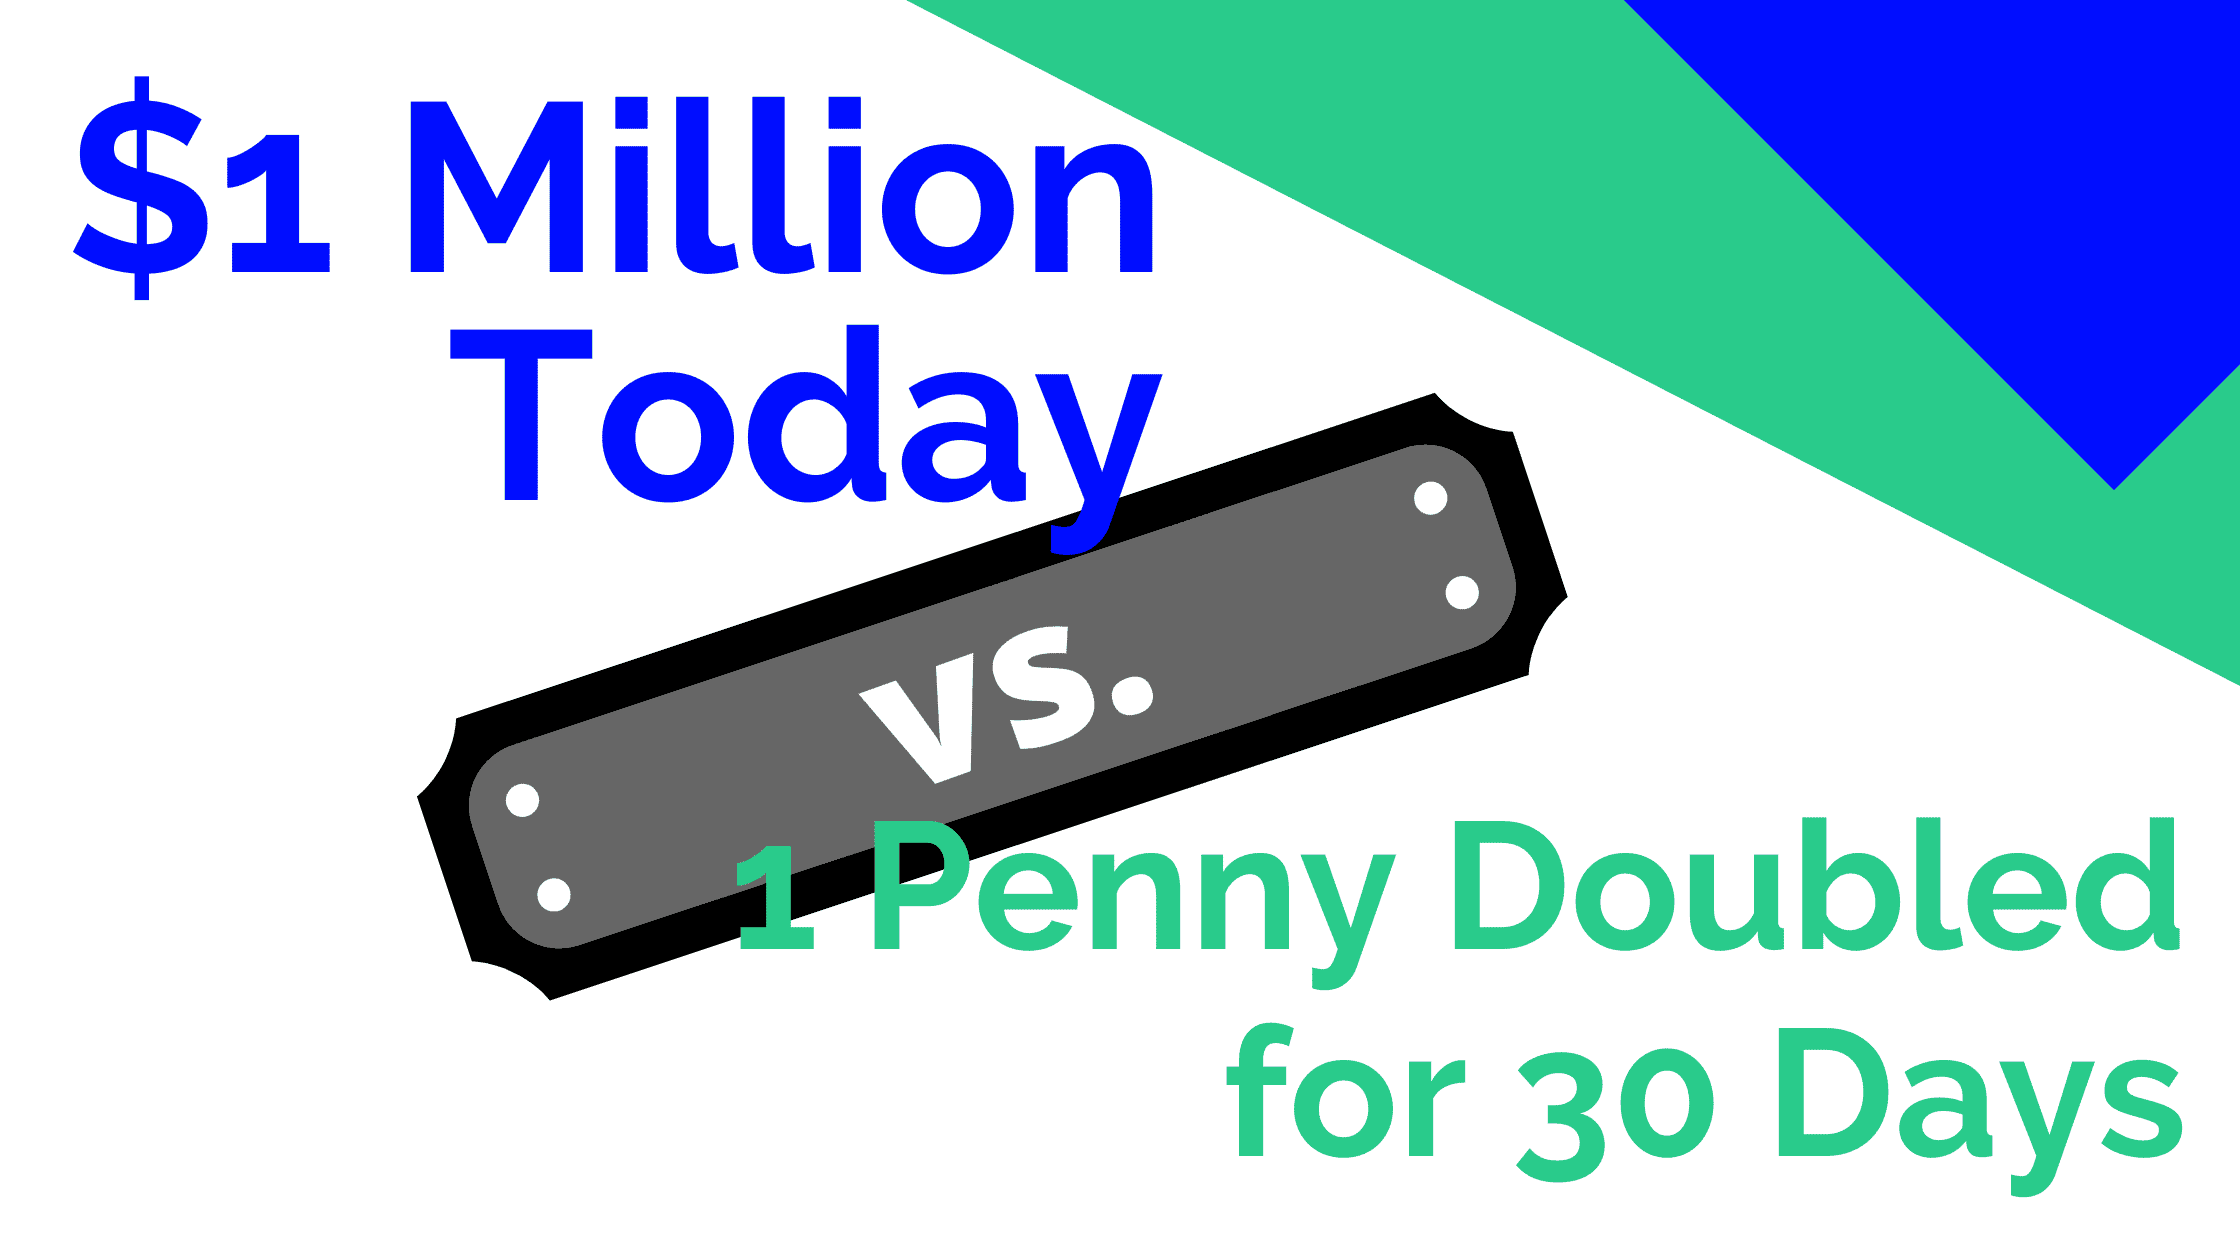 1$ Million Today or 1 Penny Doubled for 30 days